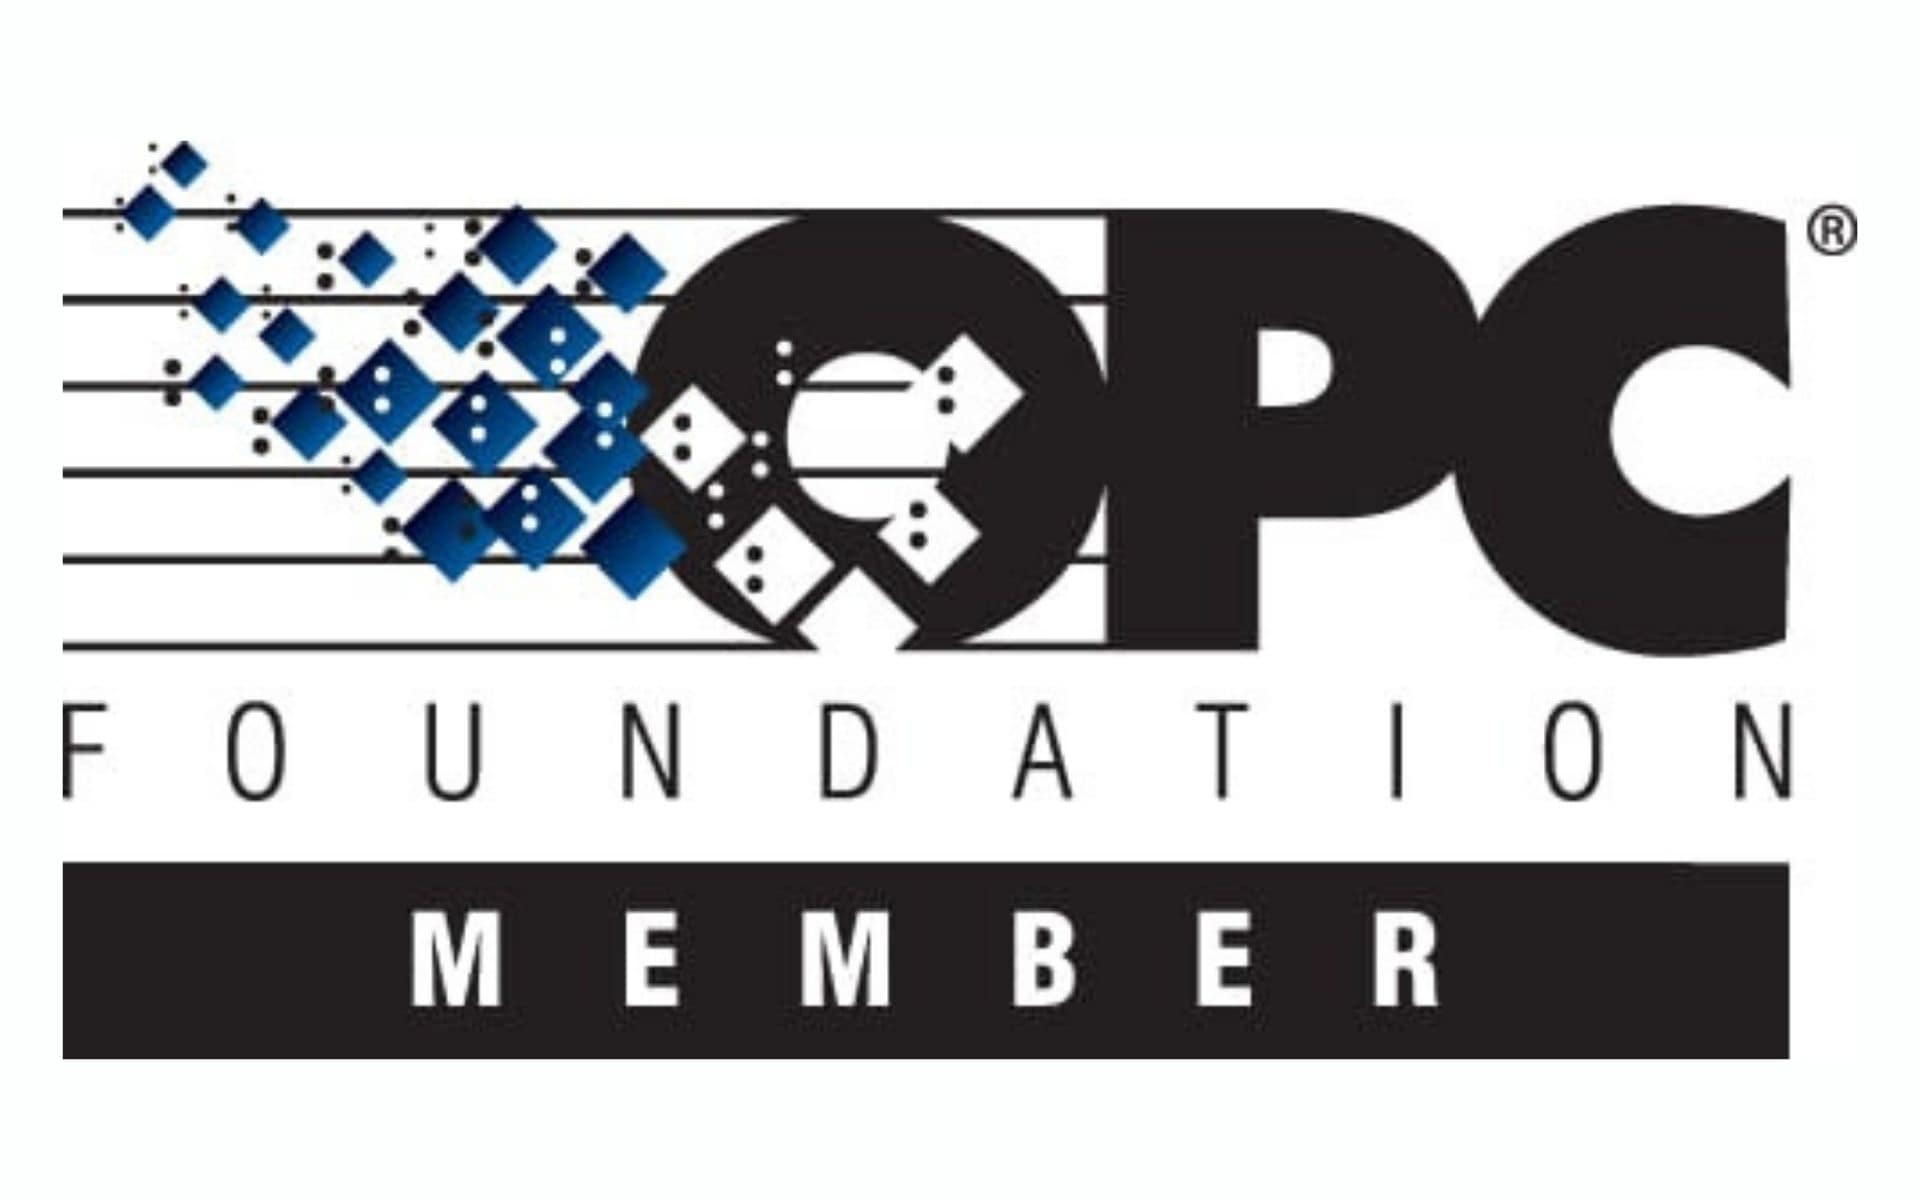 IXON becomes member of OPC Foundation